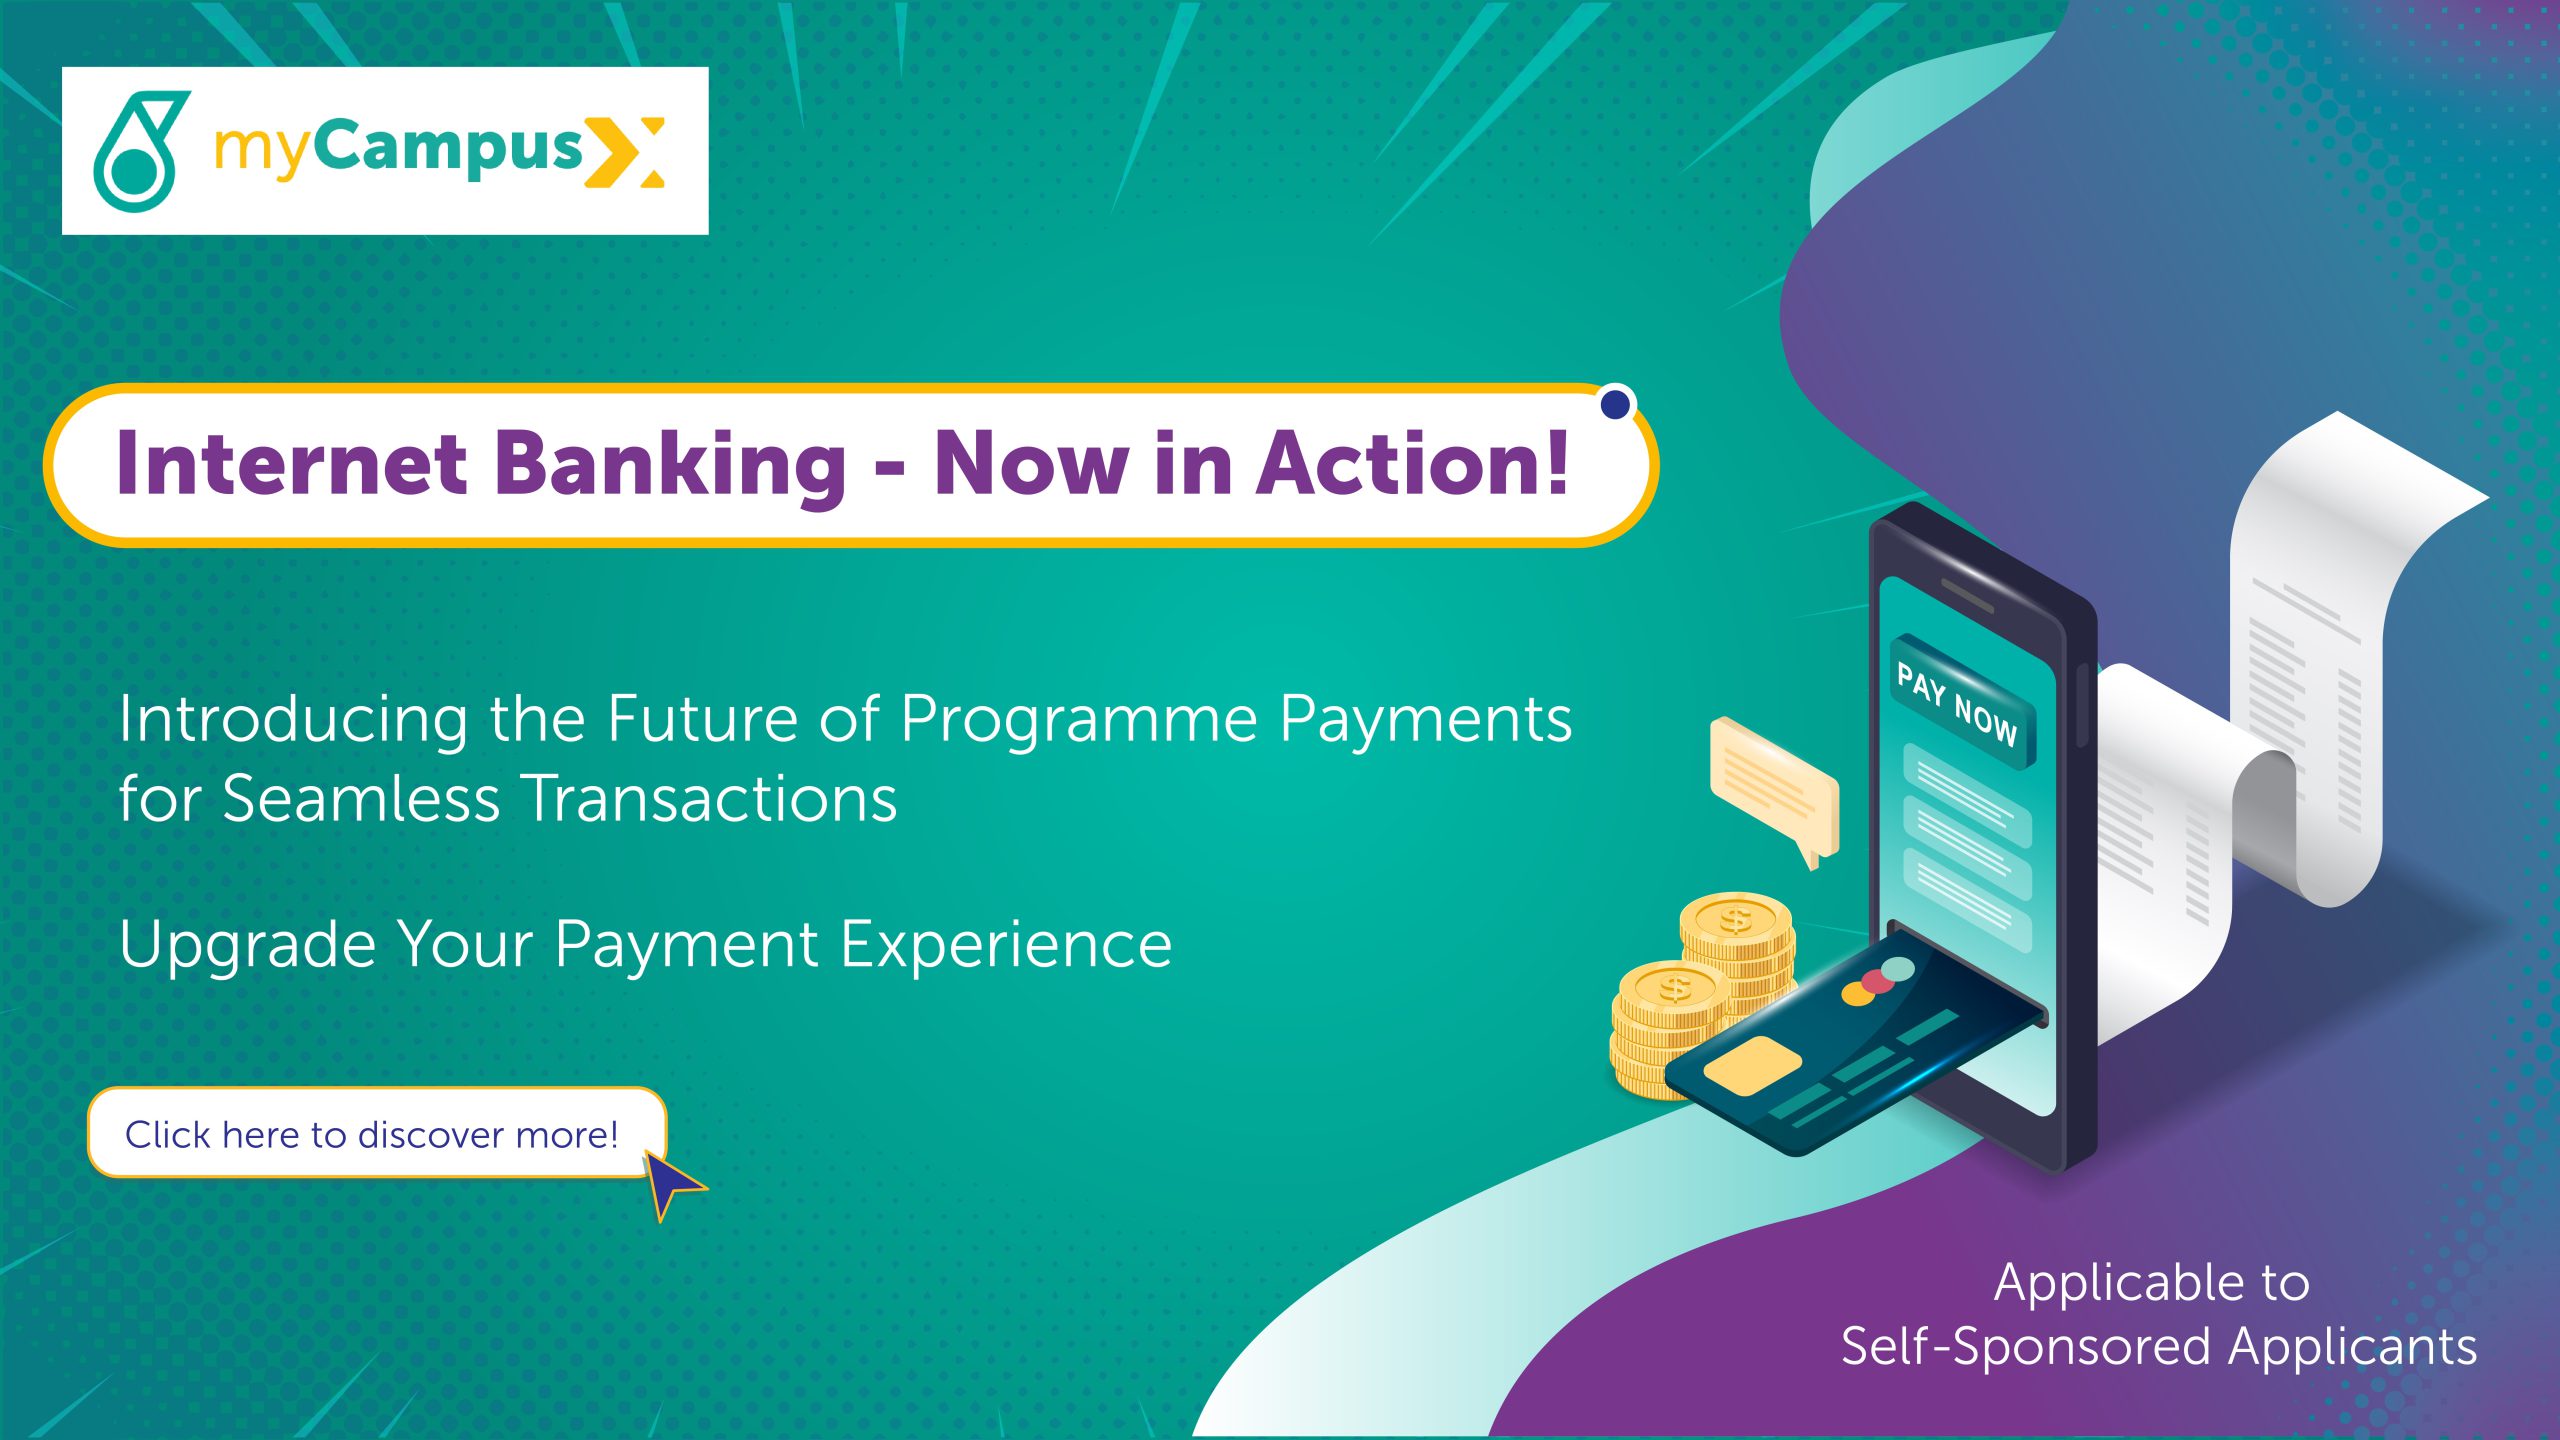 Internet Banking for Self-Sponsored Applicants Launches